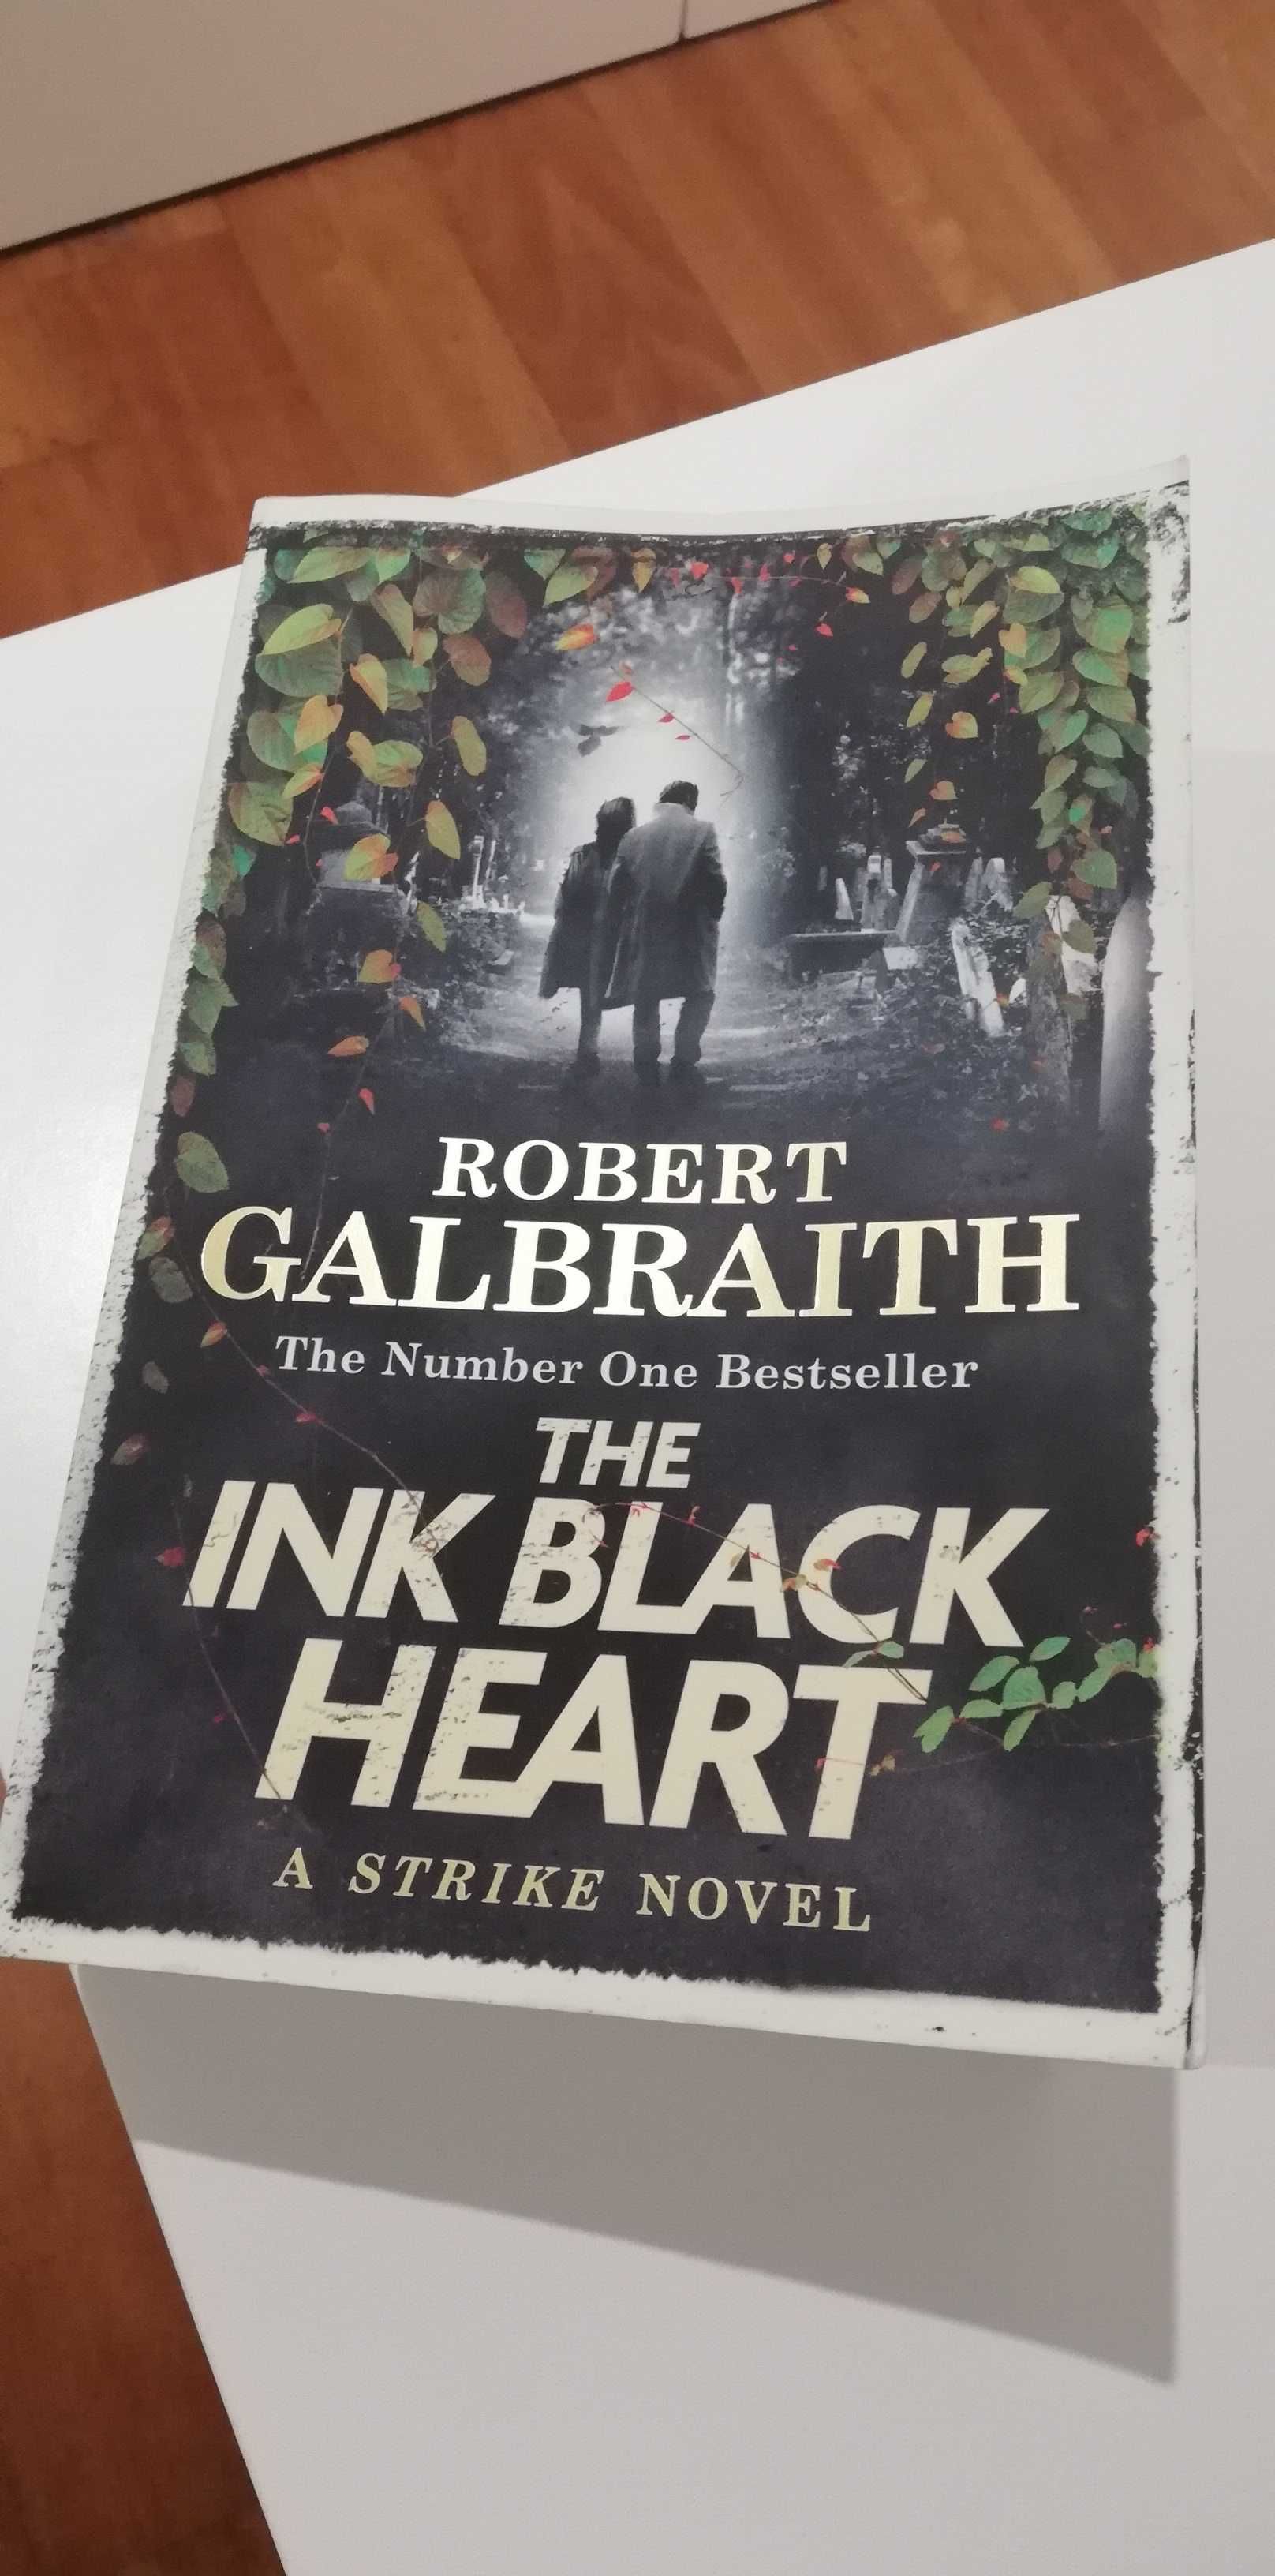 Livro "The Ink black heart", policial